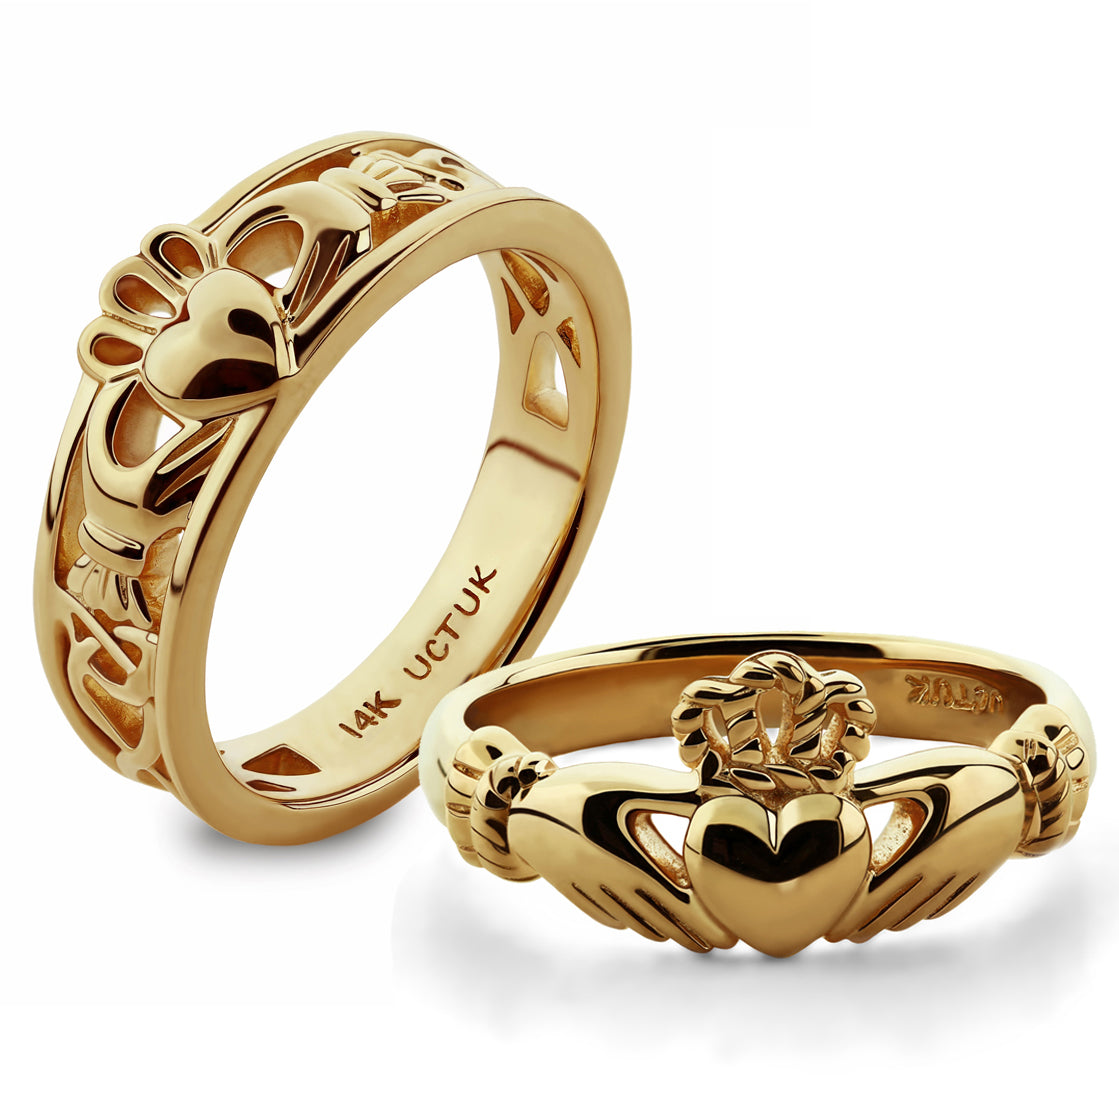 Gold Claddagh Rings